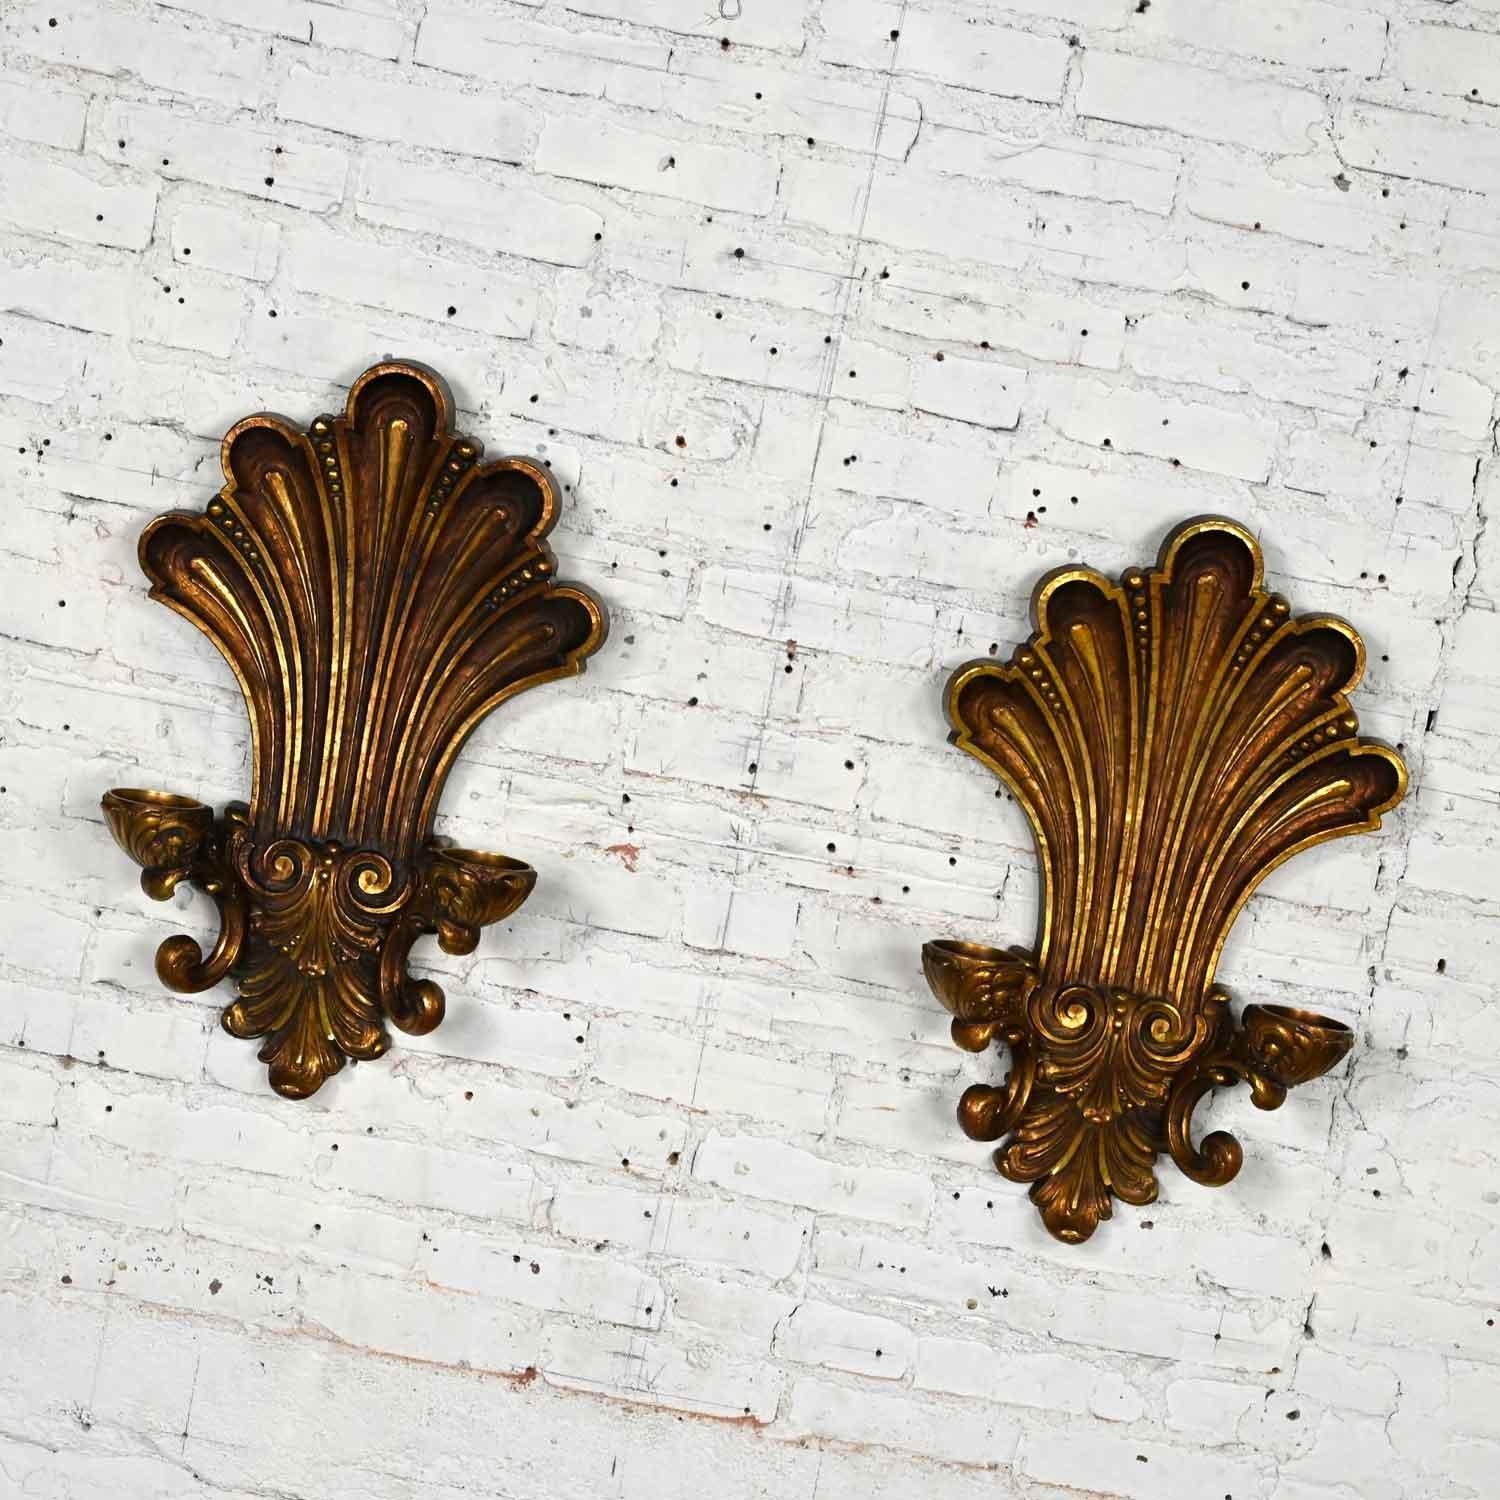 Fabulous vintage gilded Syroco Hollywood Regency double candle wall sconces, a pair. Beautiful condition, keeping in mind that these are vintage and not new so will have signs of use and wear. Please see photos and zoom in for details. We attempt to